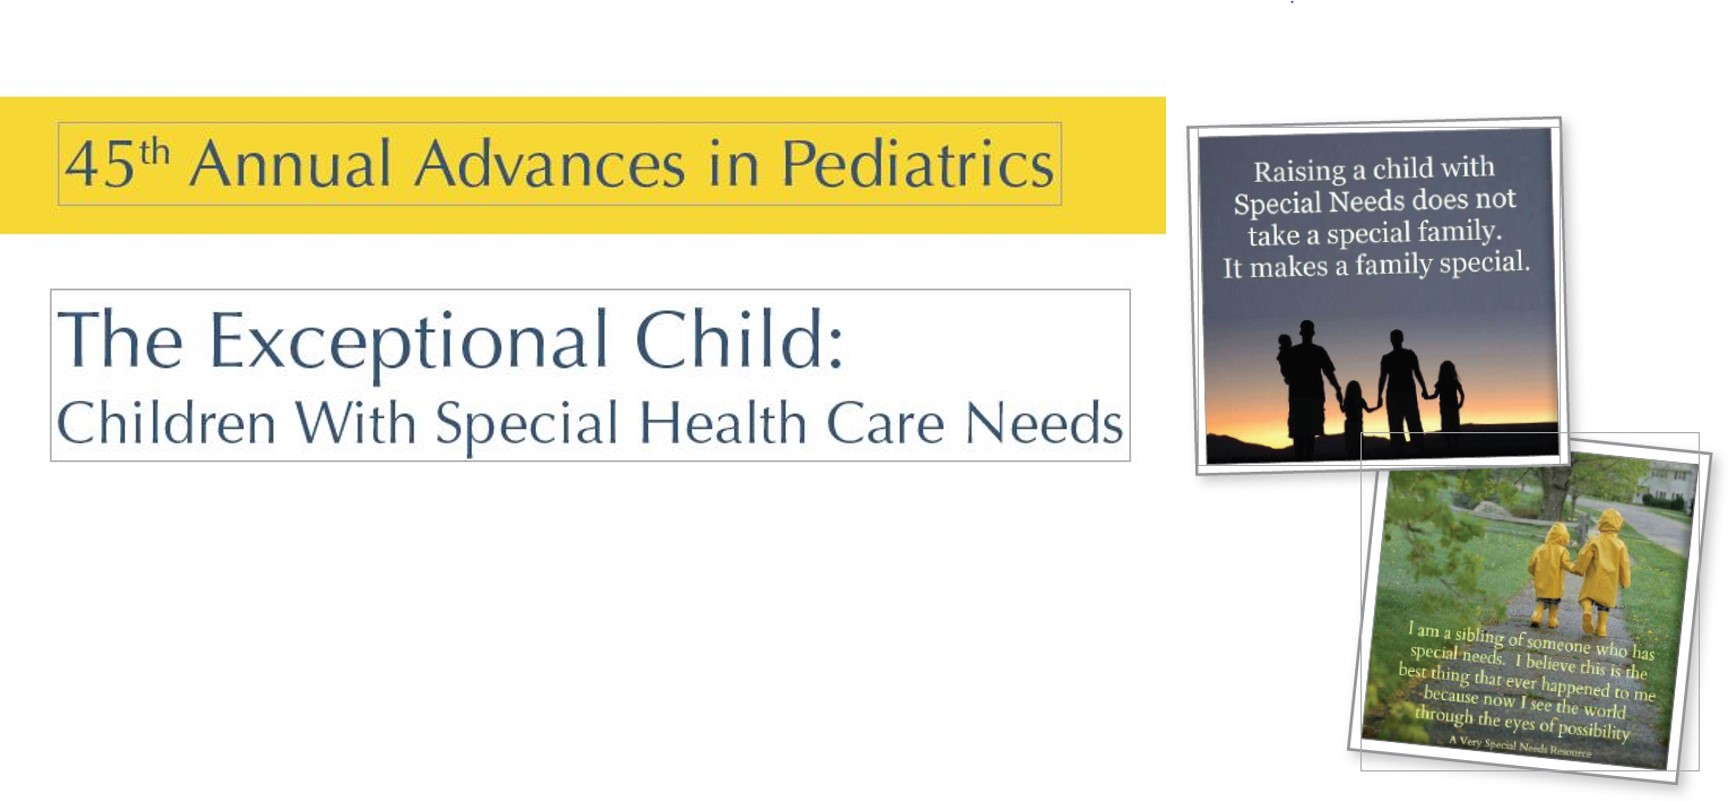 45th Annual Advances in Pediatrics: The Exceptional Child: Children with Special Health Care Needs Banner